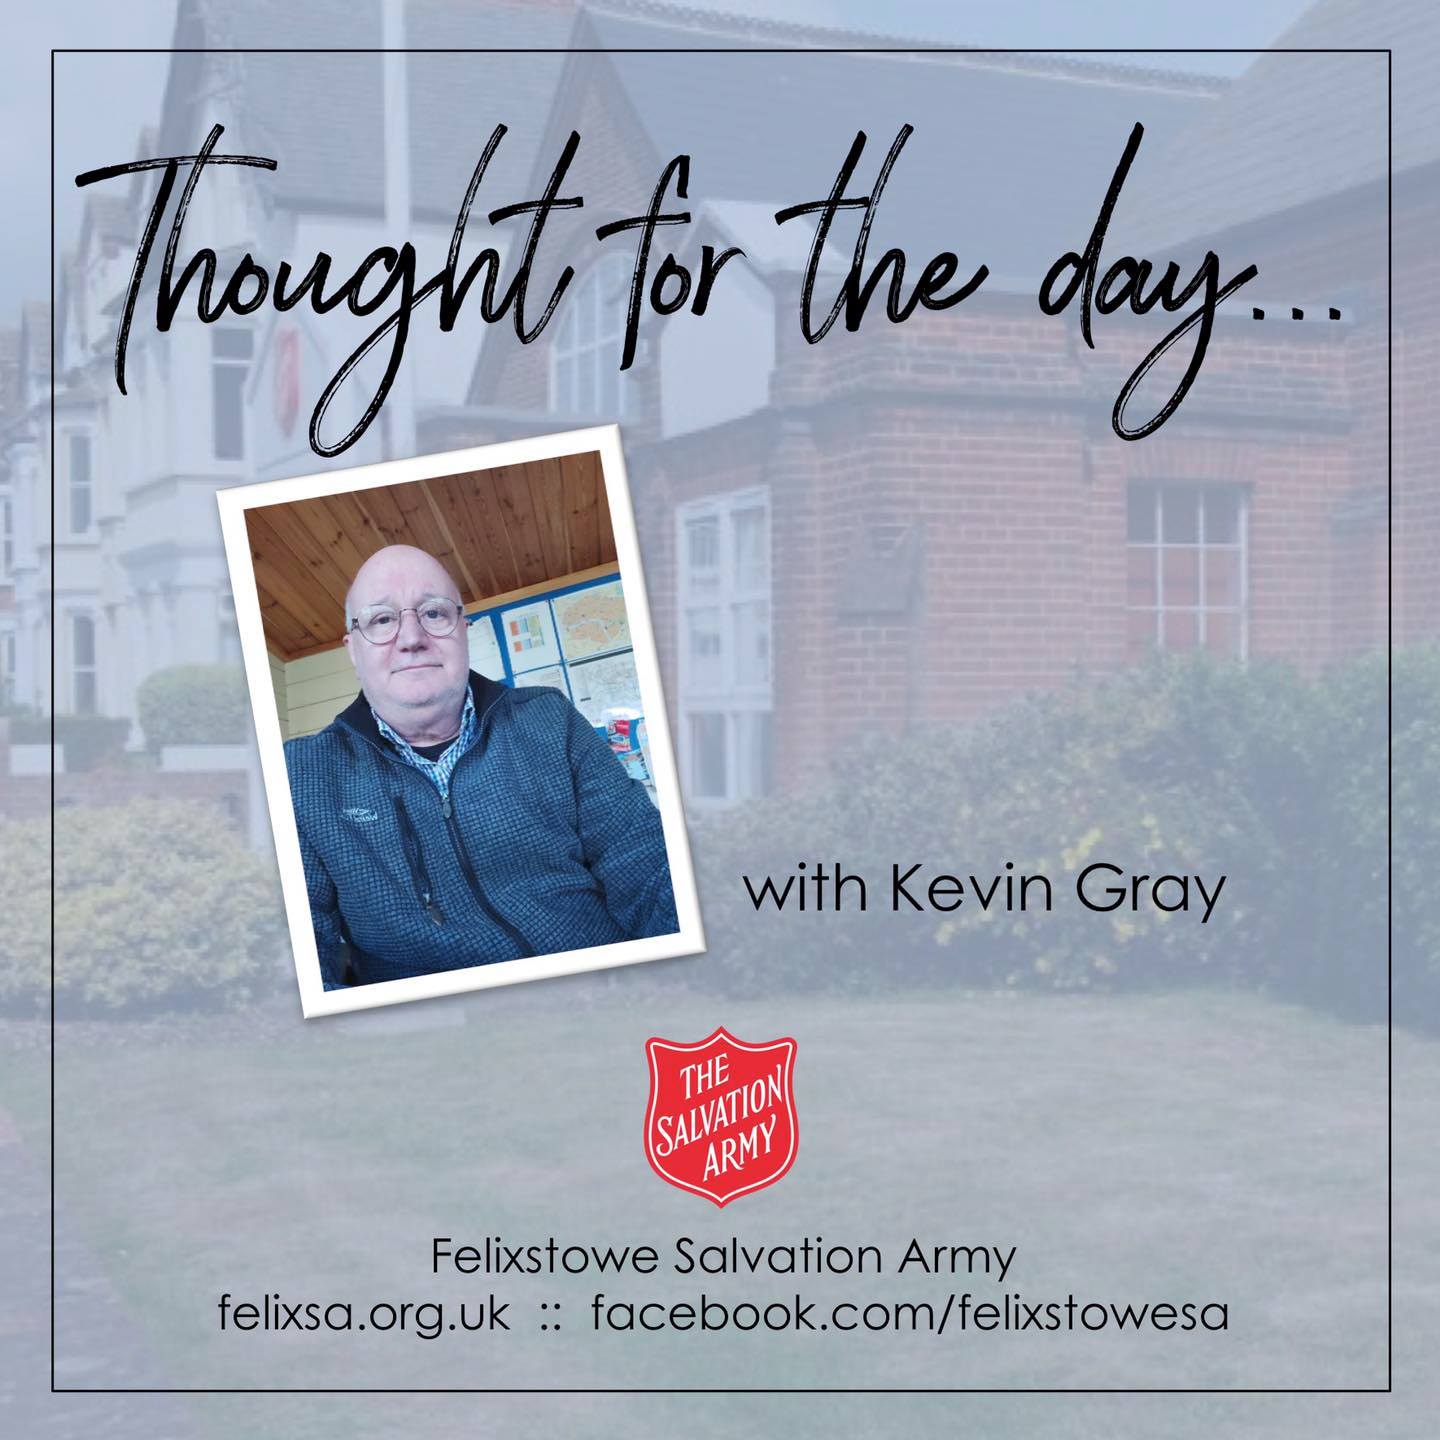 Thought for the Day with Kevin Gray